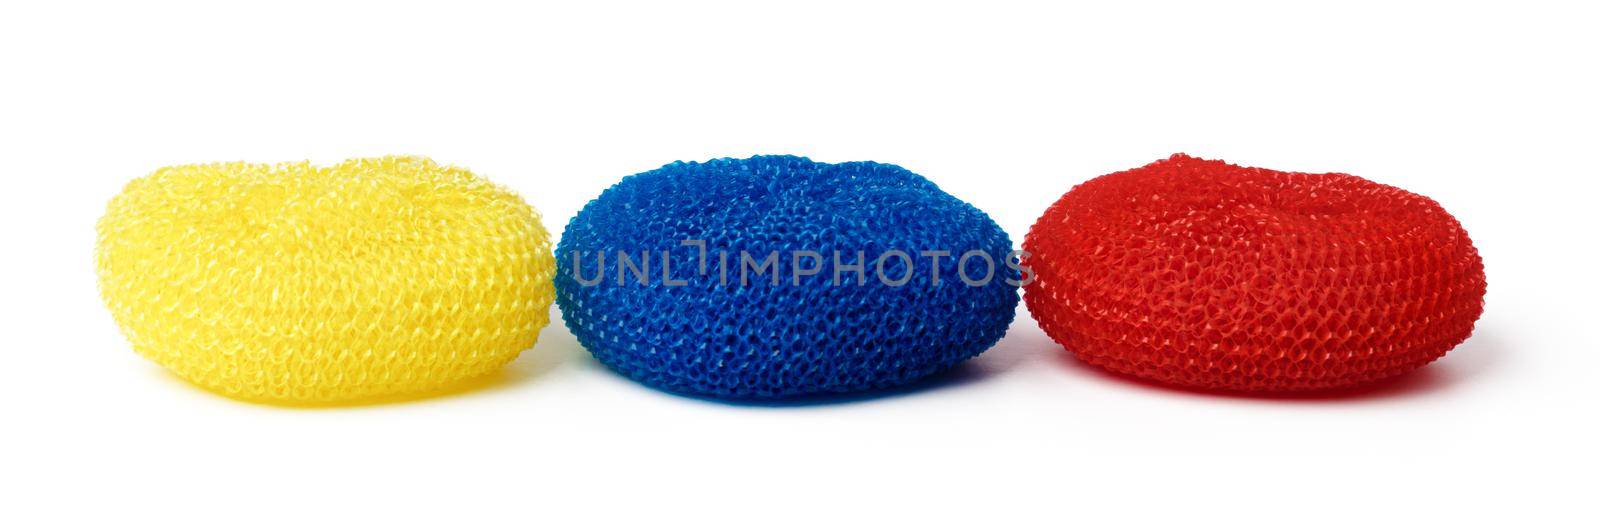 Sponge for dish cleaning isolated on white background by Fabrikasimf